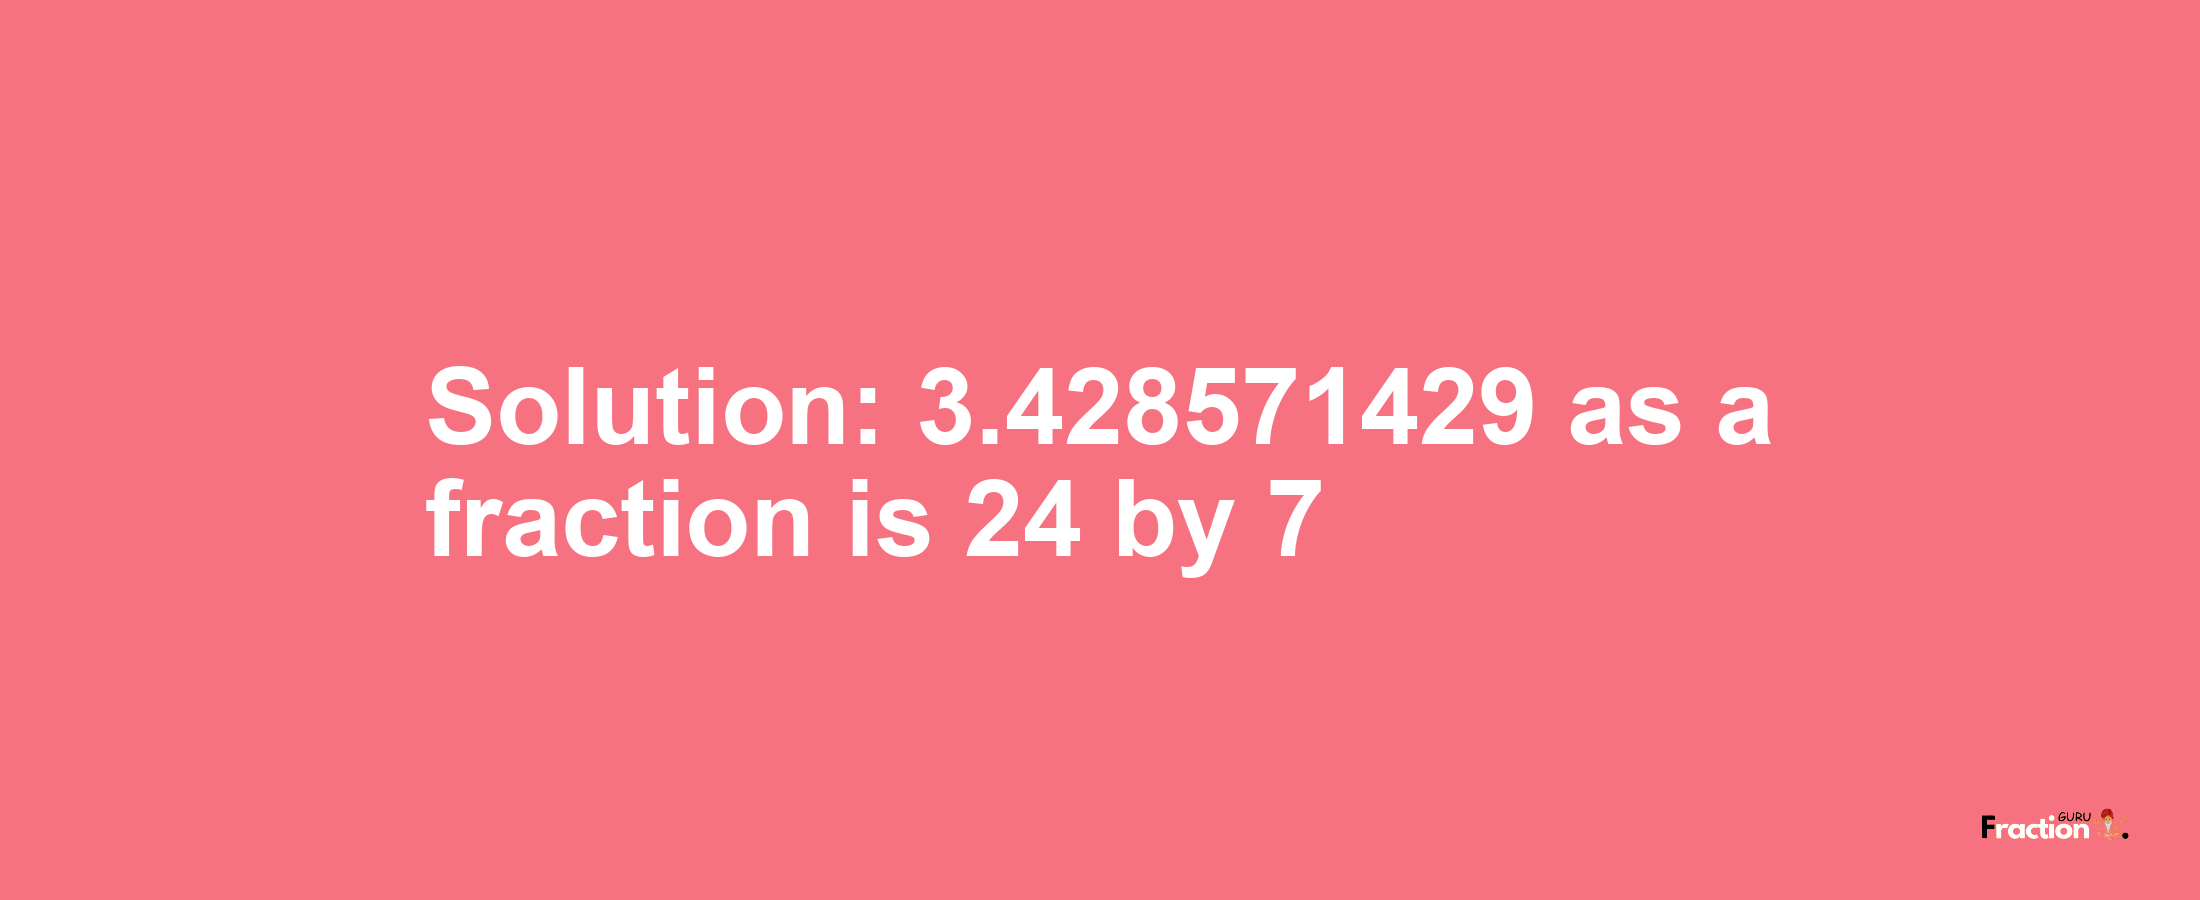 Solution:3.428571429 as a fraction is 24/7